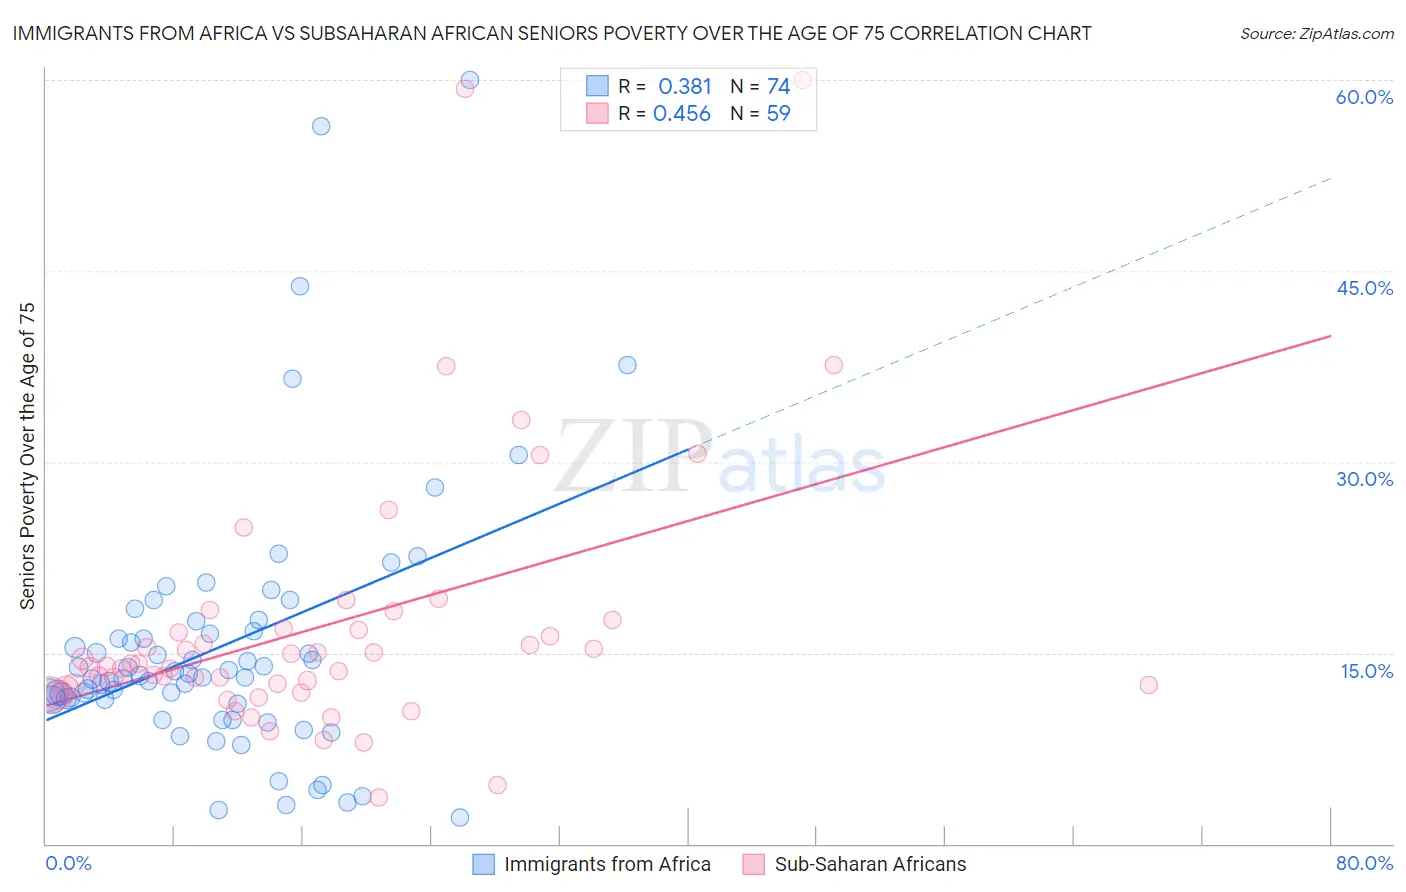 Immigrants from Africa vs Subsaharan African Seniors Poverty Over the Age of 75